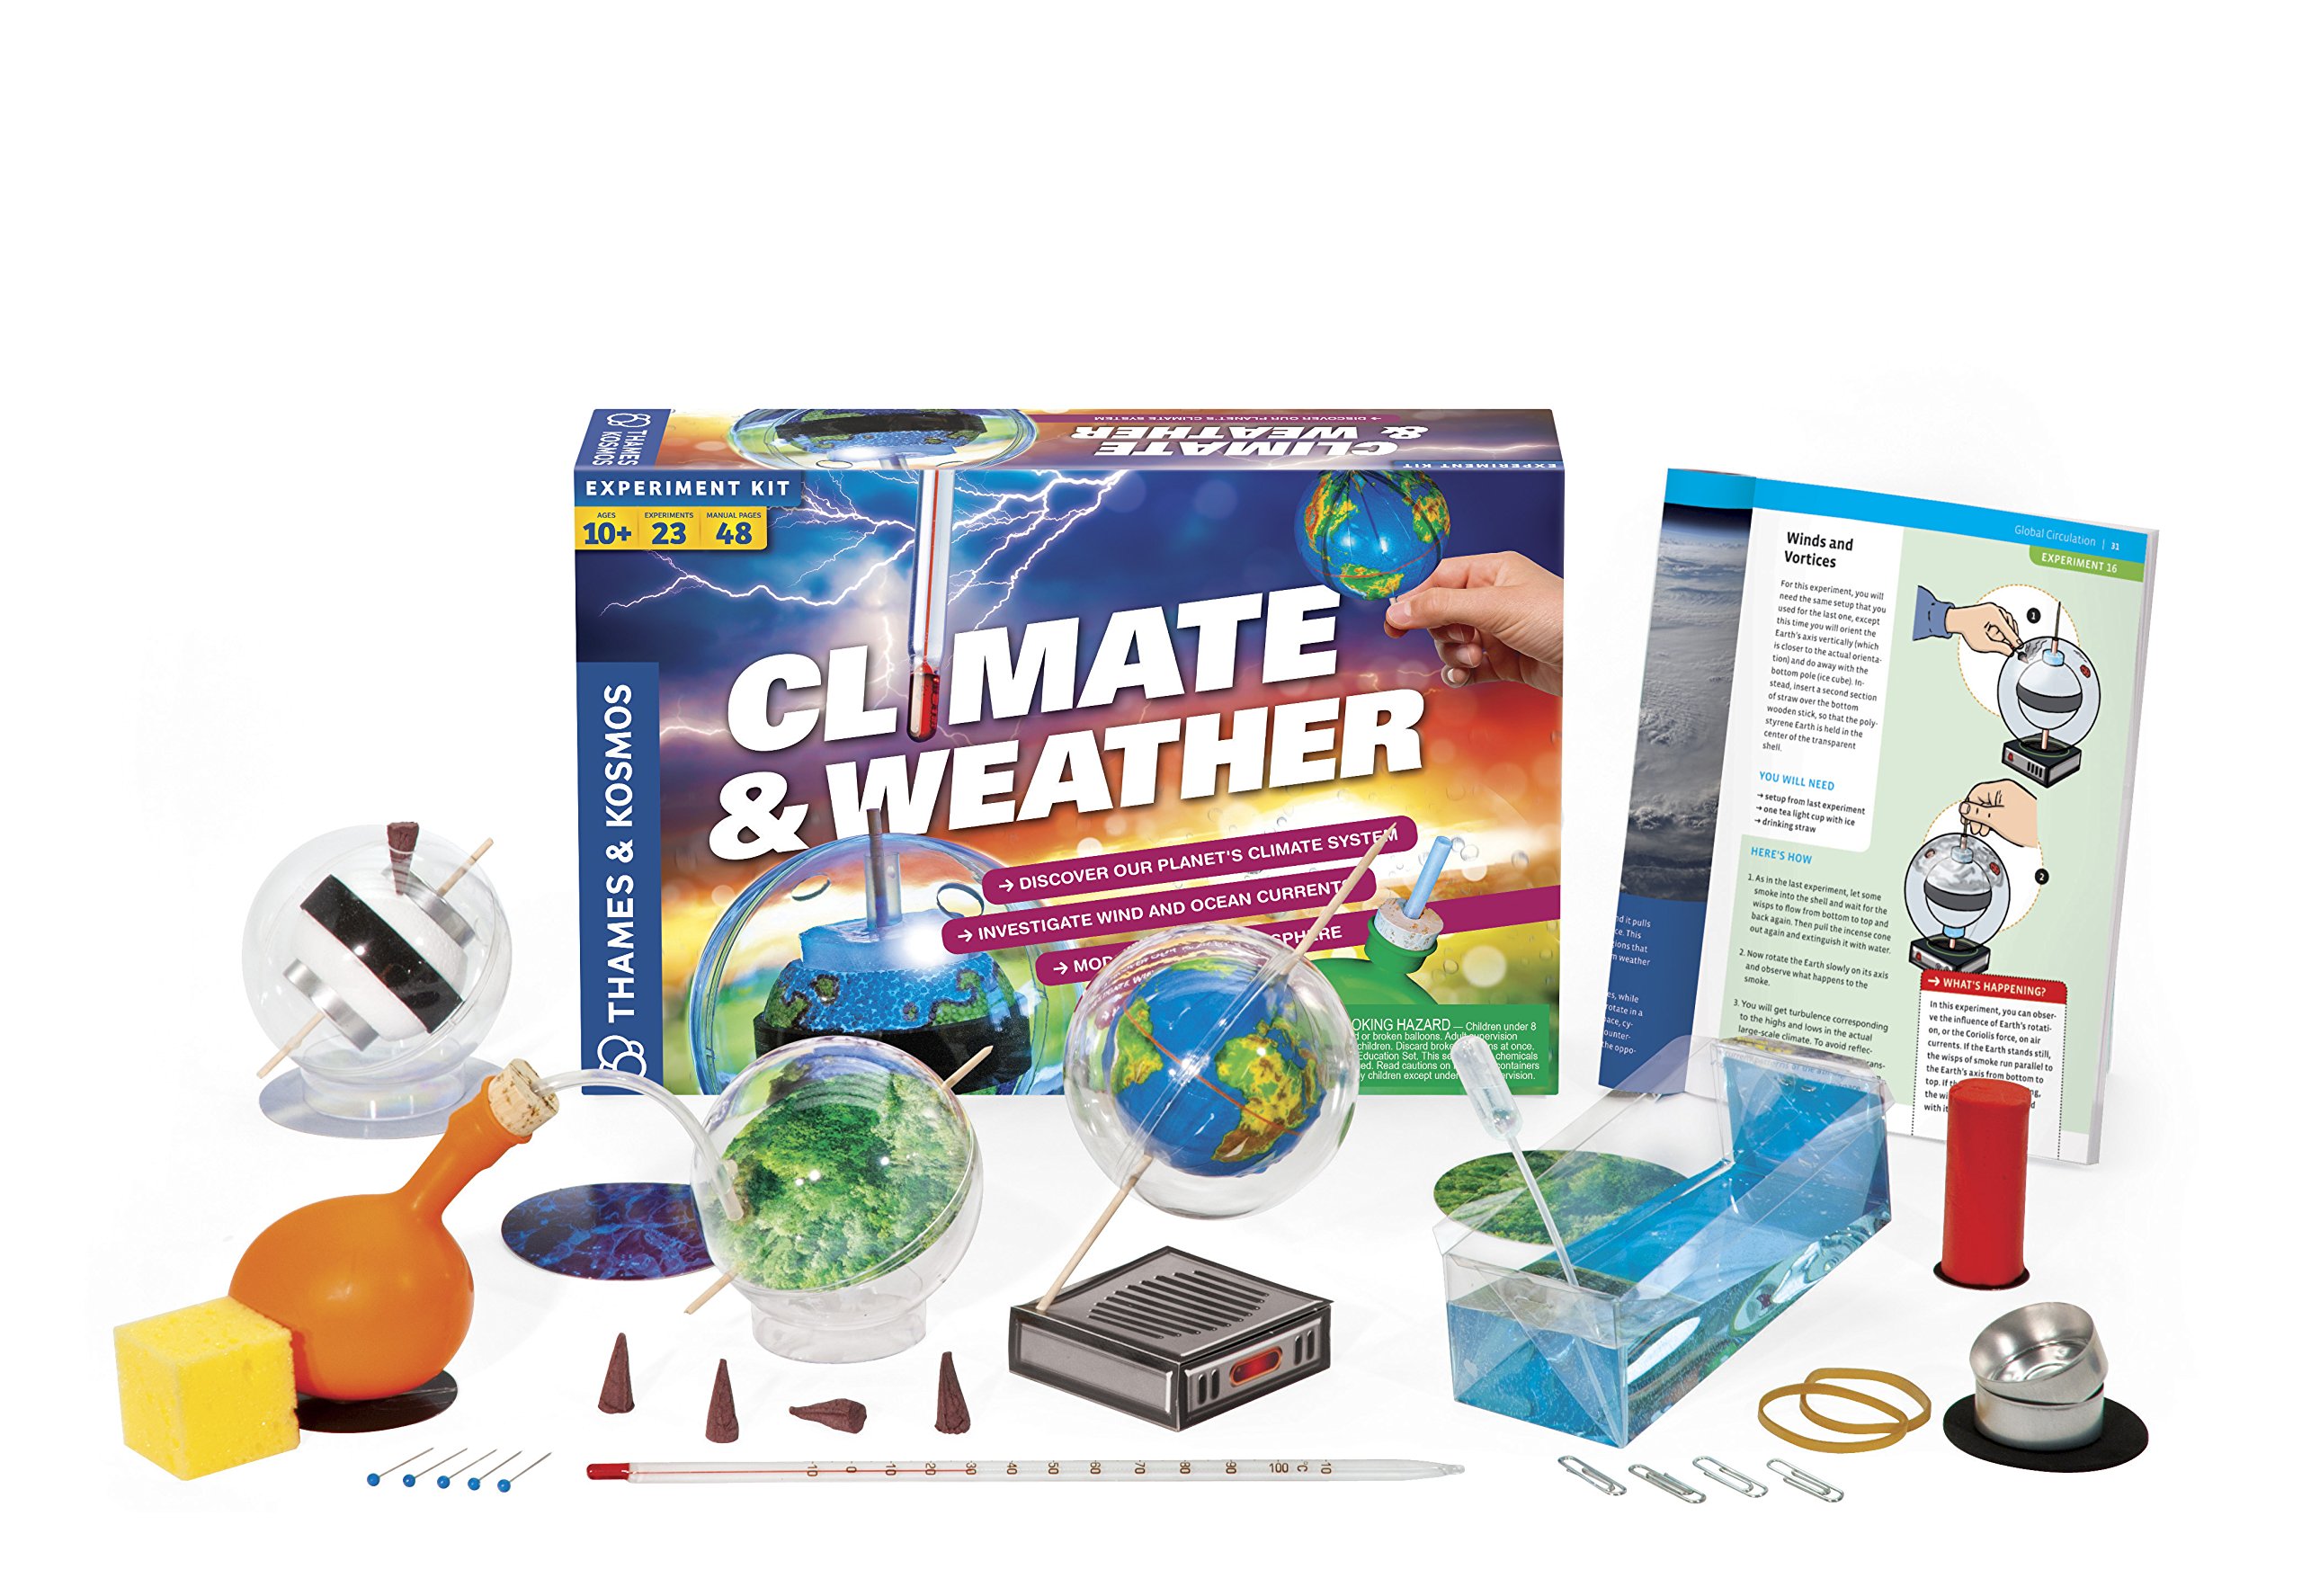 Book Cover Thames & Kosmos Climate & Weather Science Kit | Learn About Climate Change, Global Warming, Ocean Currents | 23 Stem Experiments | 48 Page Color Manual | Winner Dr. Toy Best Green Toy Award